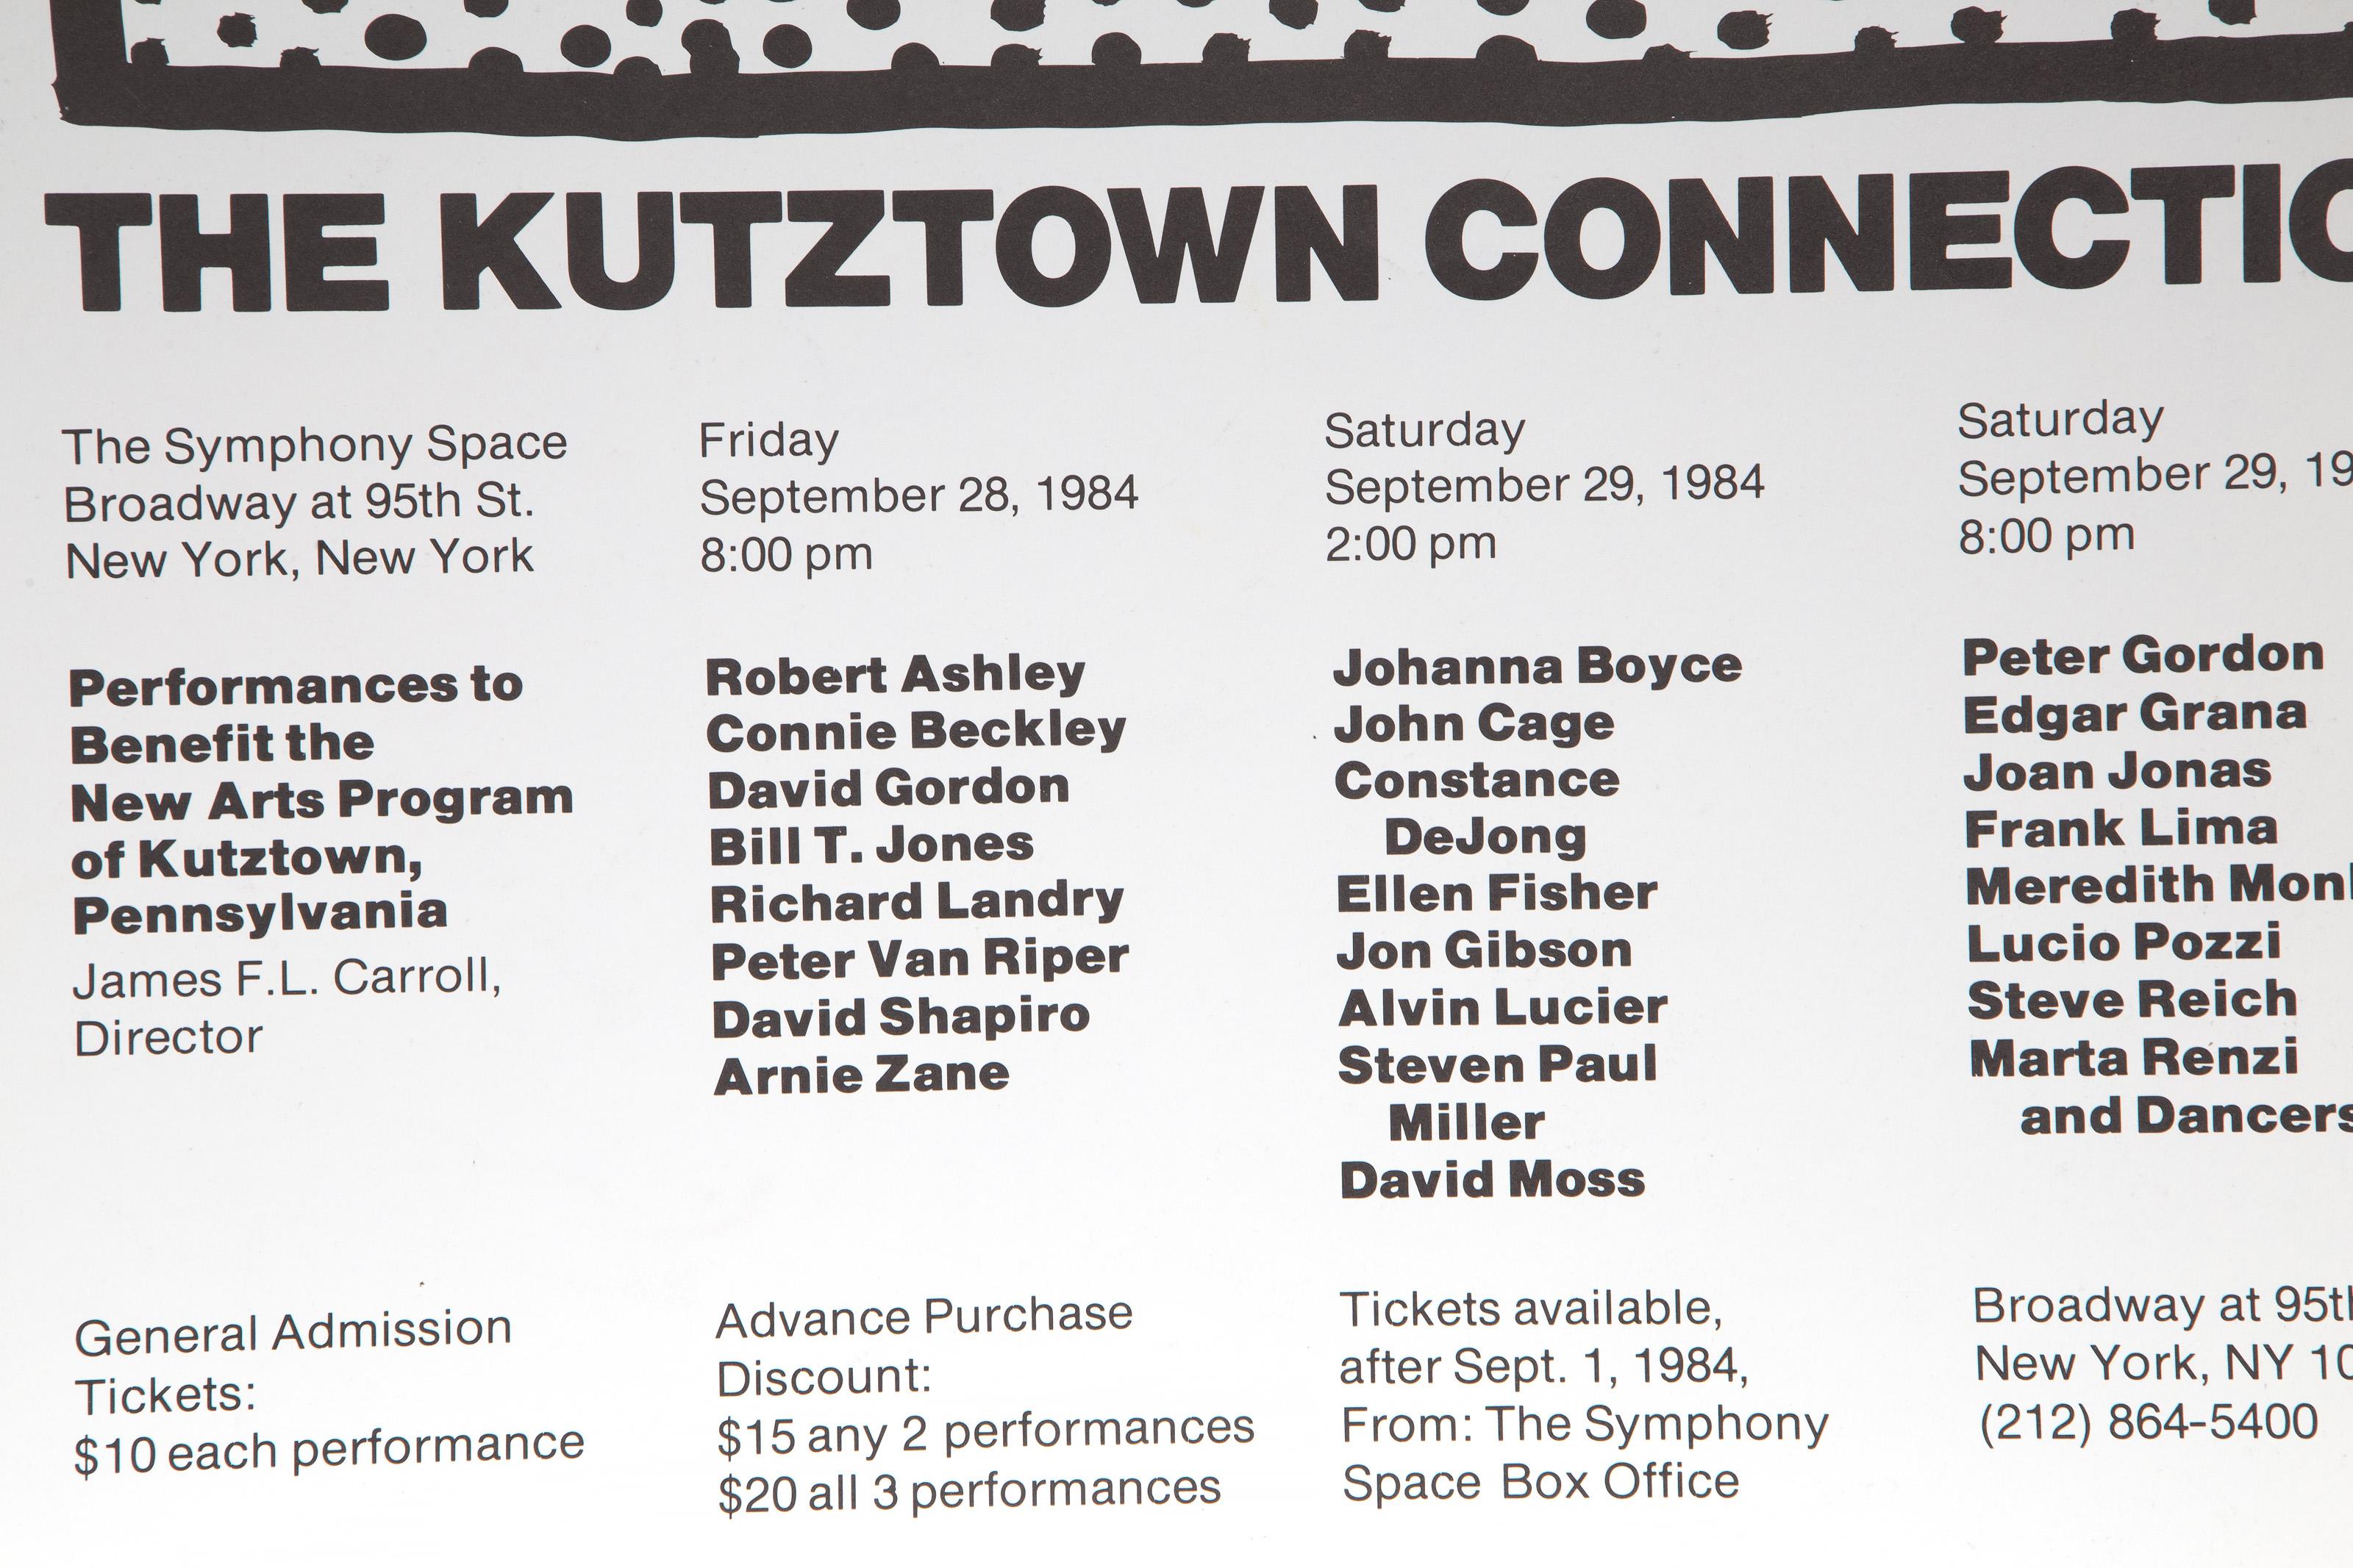 The Kutztown Connection 1984, Exhibition Poster by Keith Haring 2